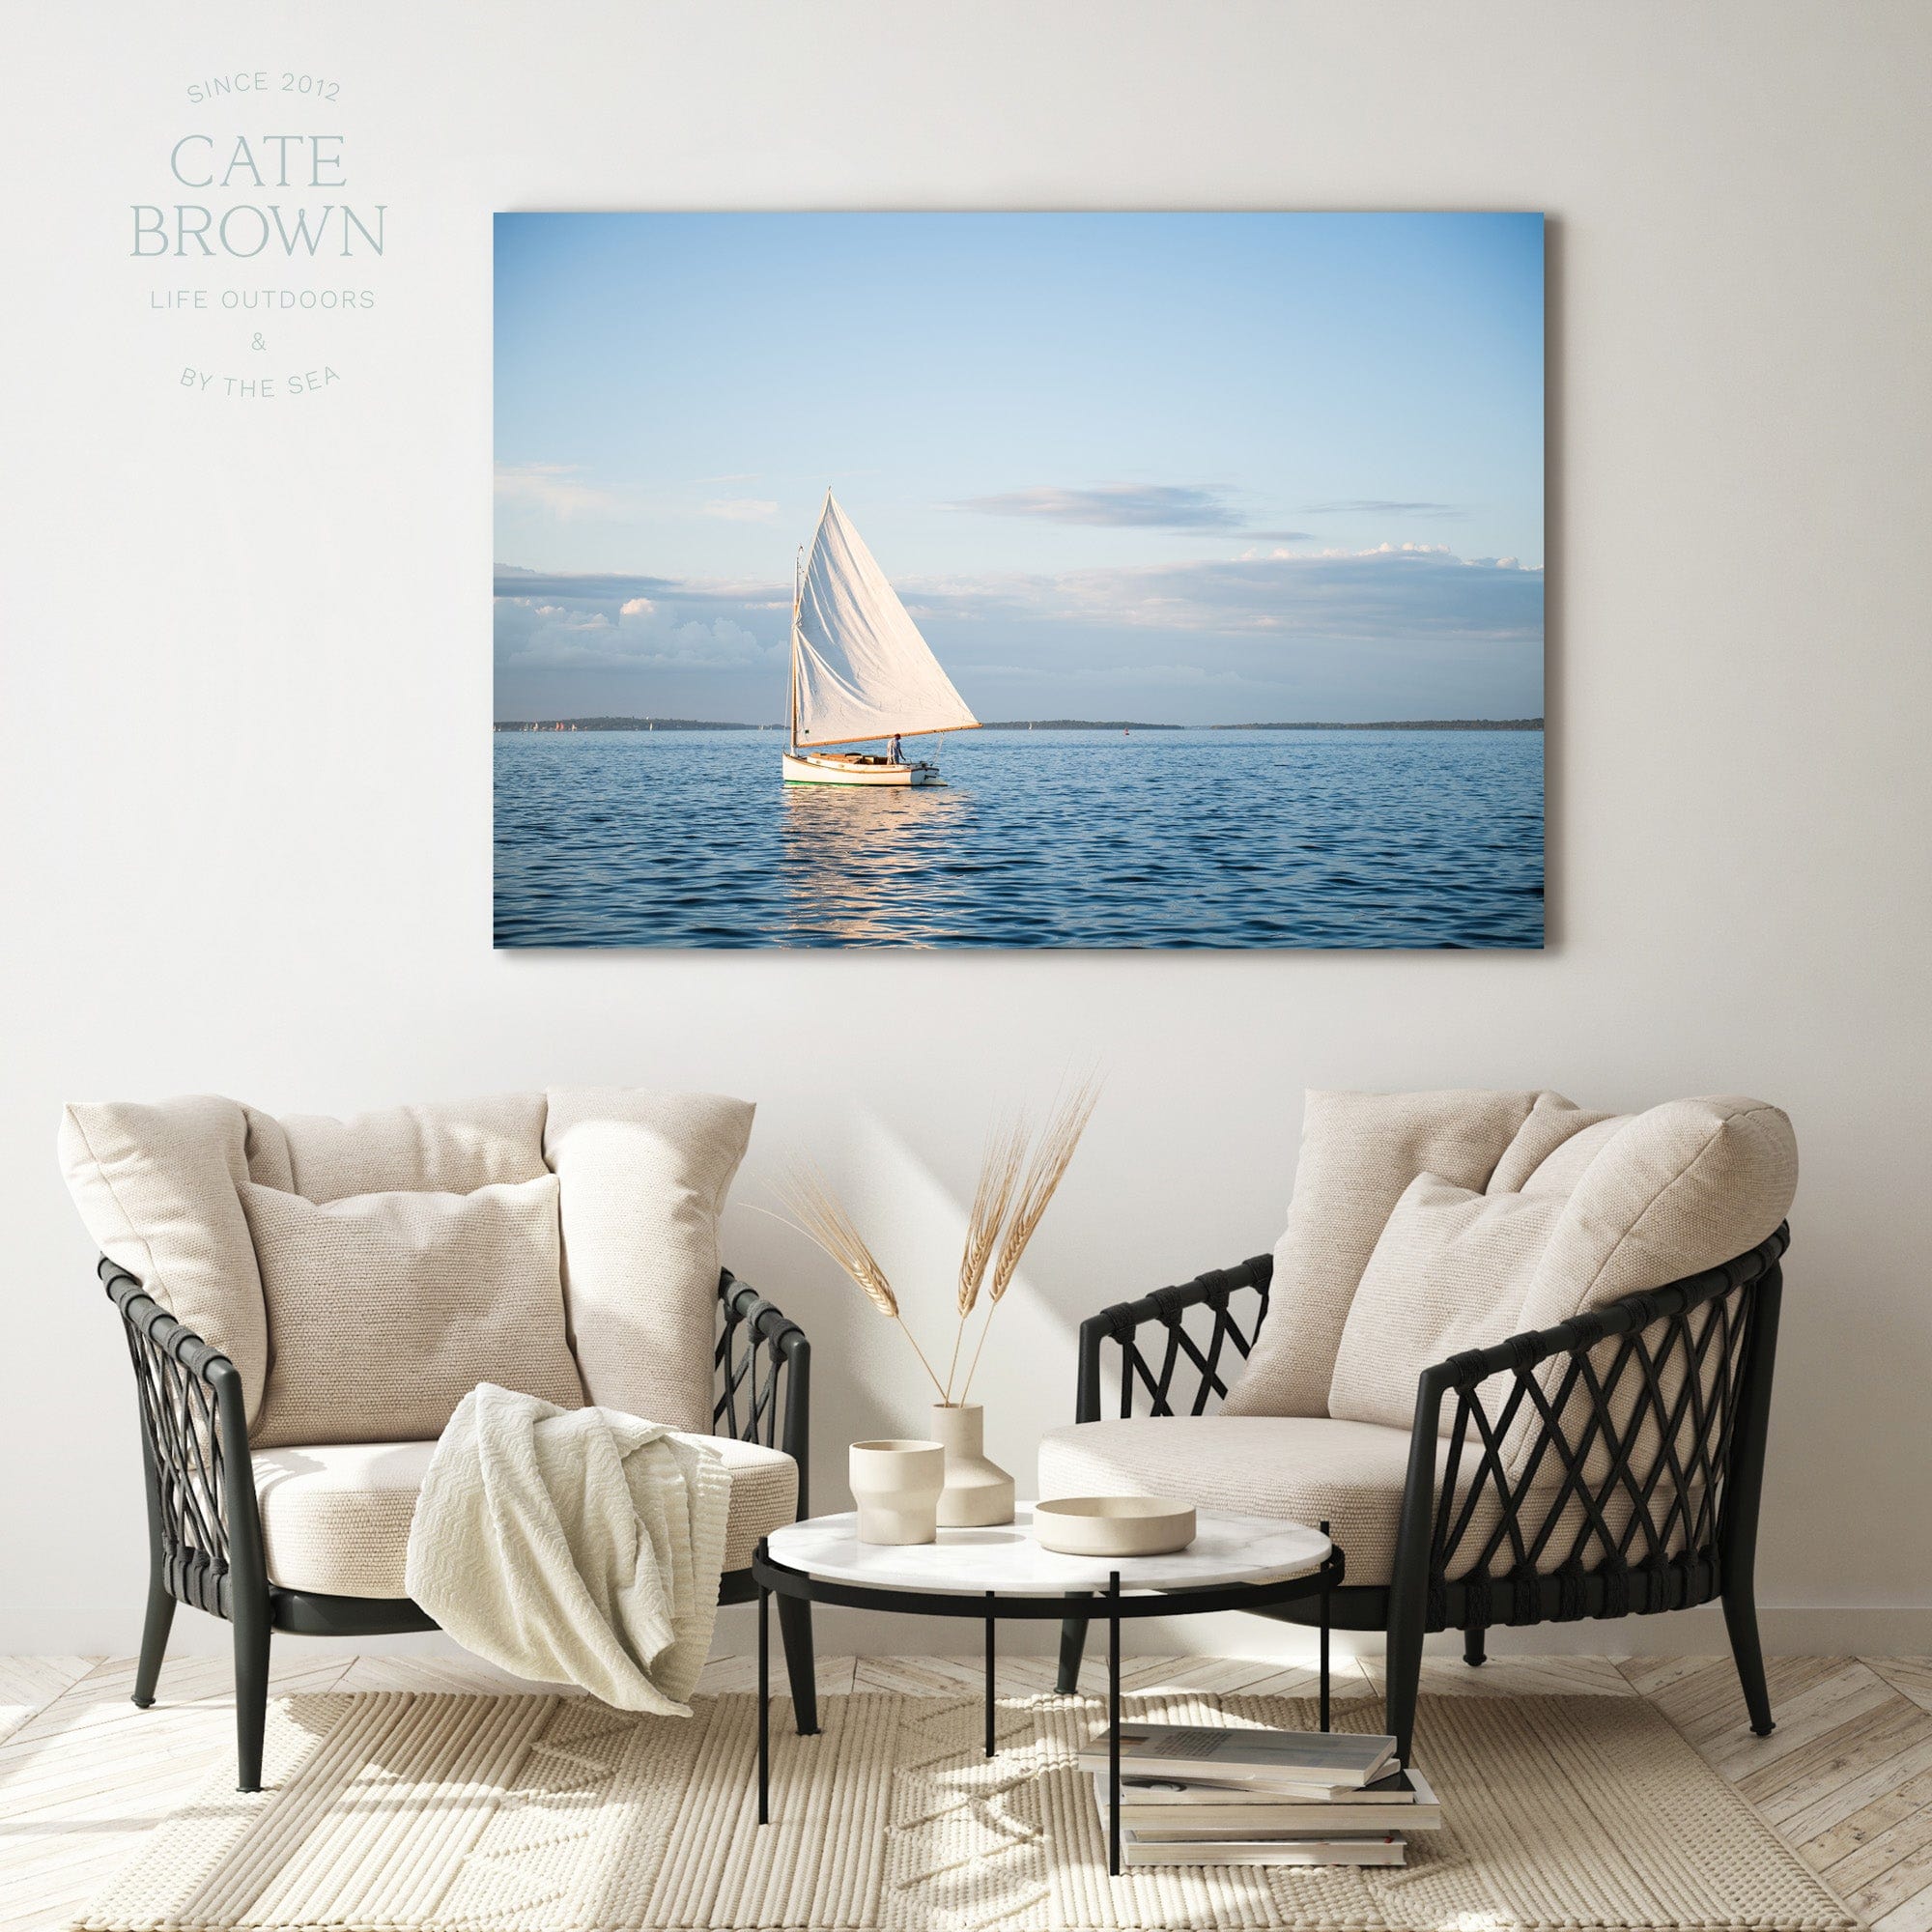 Cate Brown Photo Canvas / 16"x24" / None (Print Only) Summer Sails  //  Nautical Photography Made to Order Ocean Fine Art